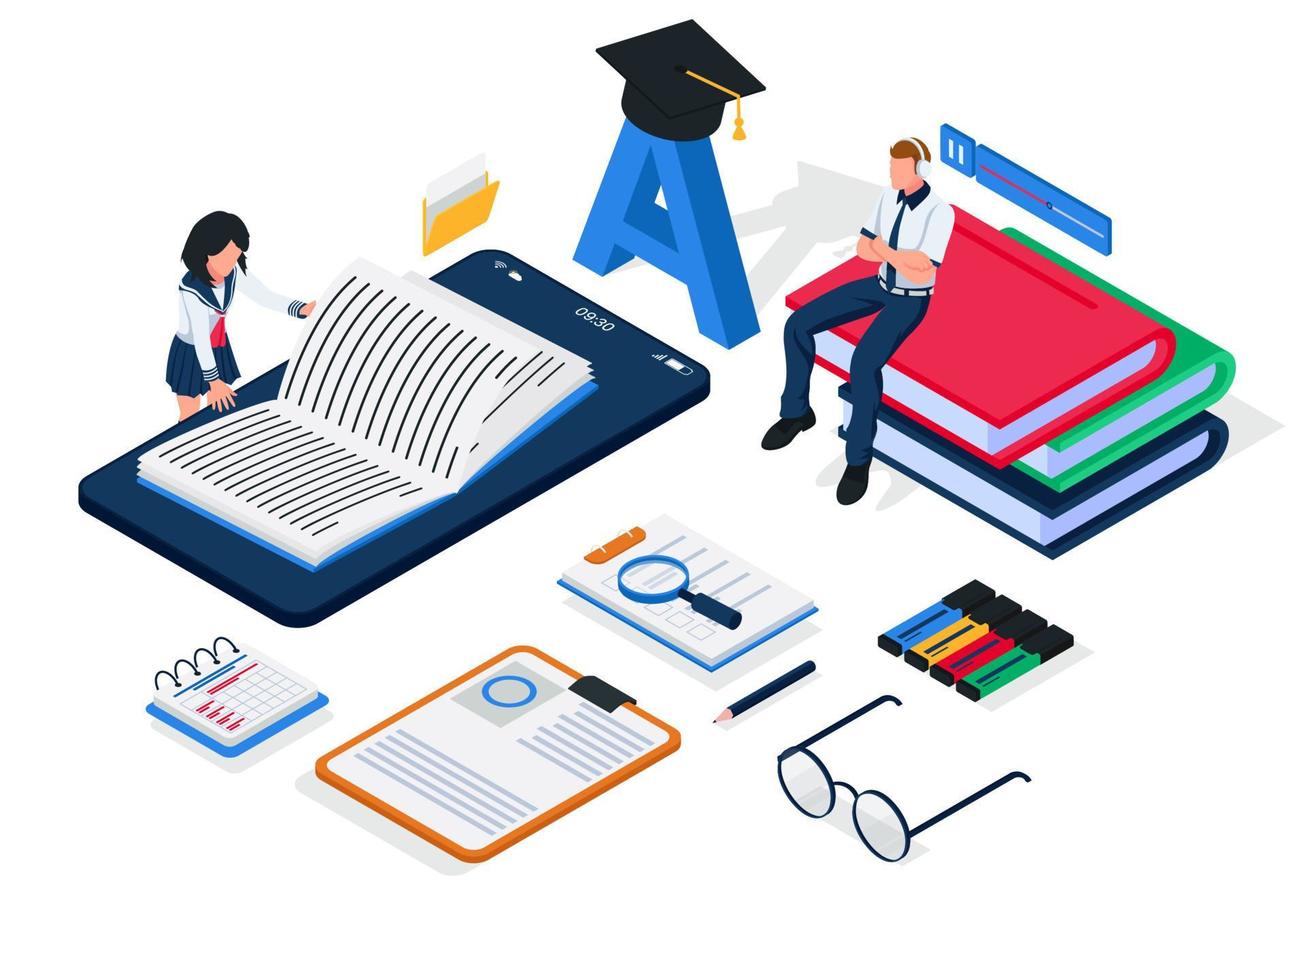 Group of students do online education learning, female reading ebook at smartphone, male listening audiobook, e-learning illustration concept. Group of people using modern learning tools. Vector